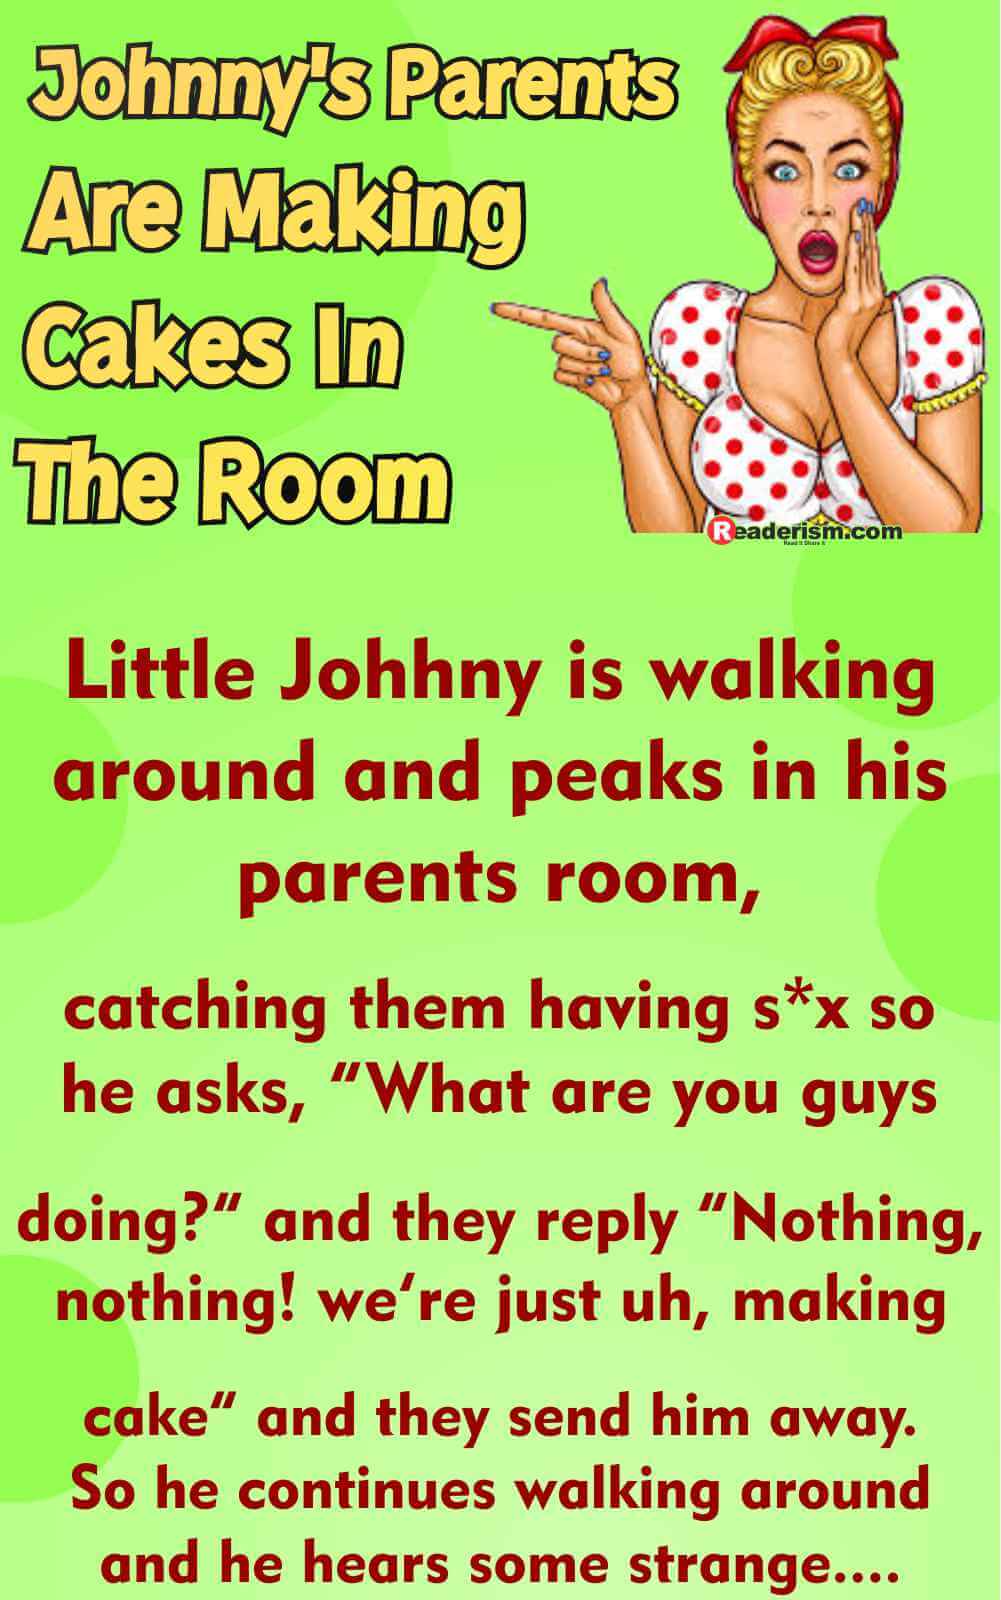 Little Johnny's Parents Are making Cake in the Room - Readerism